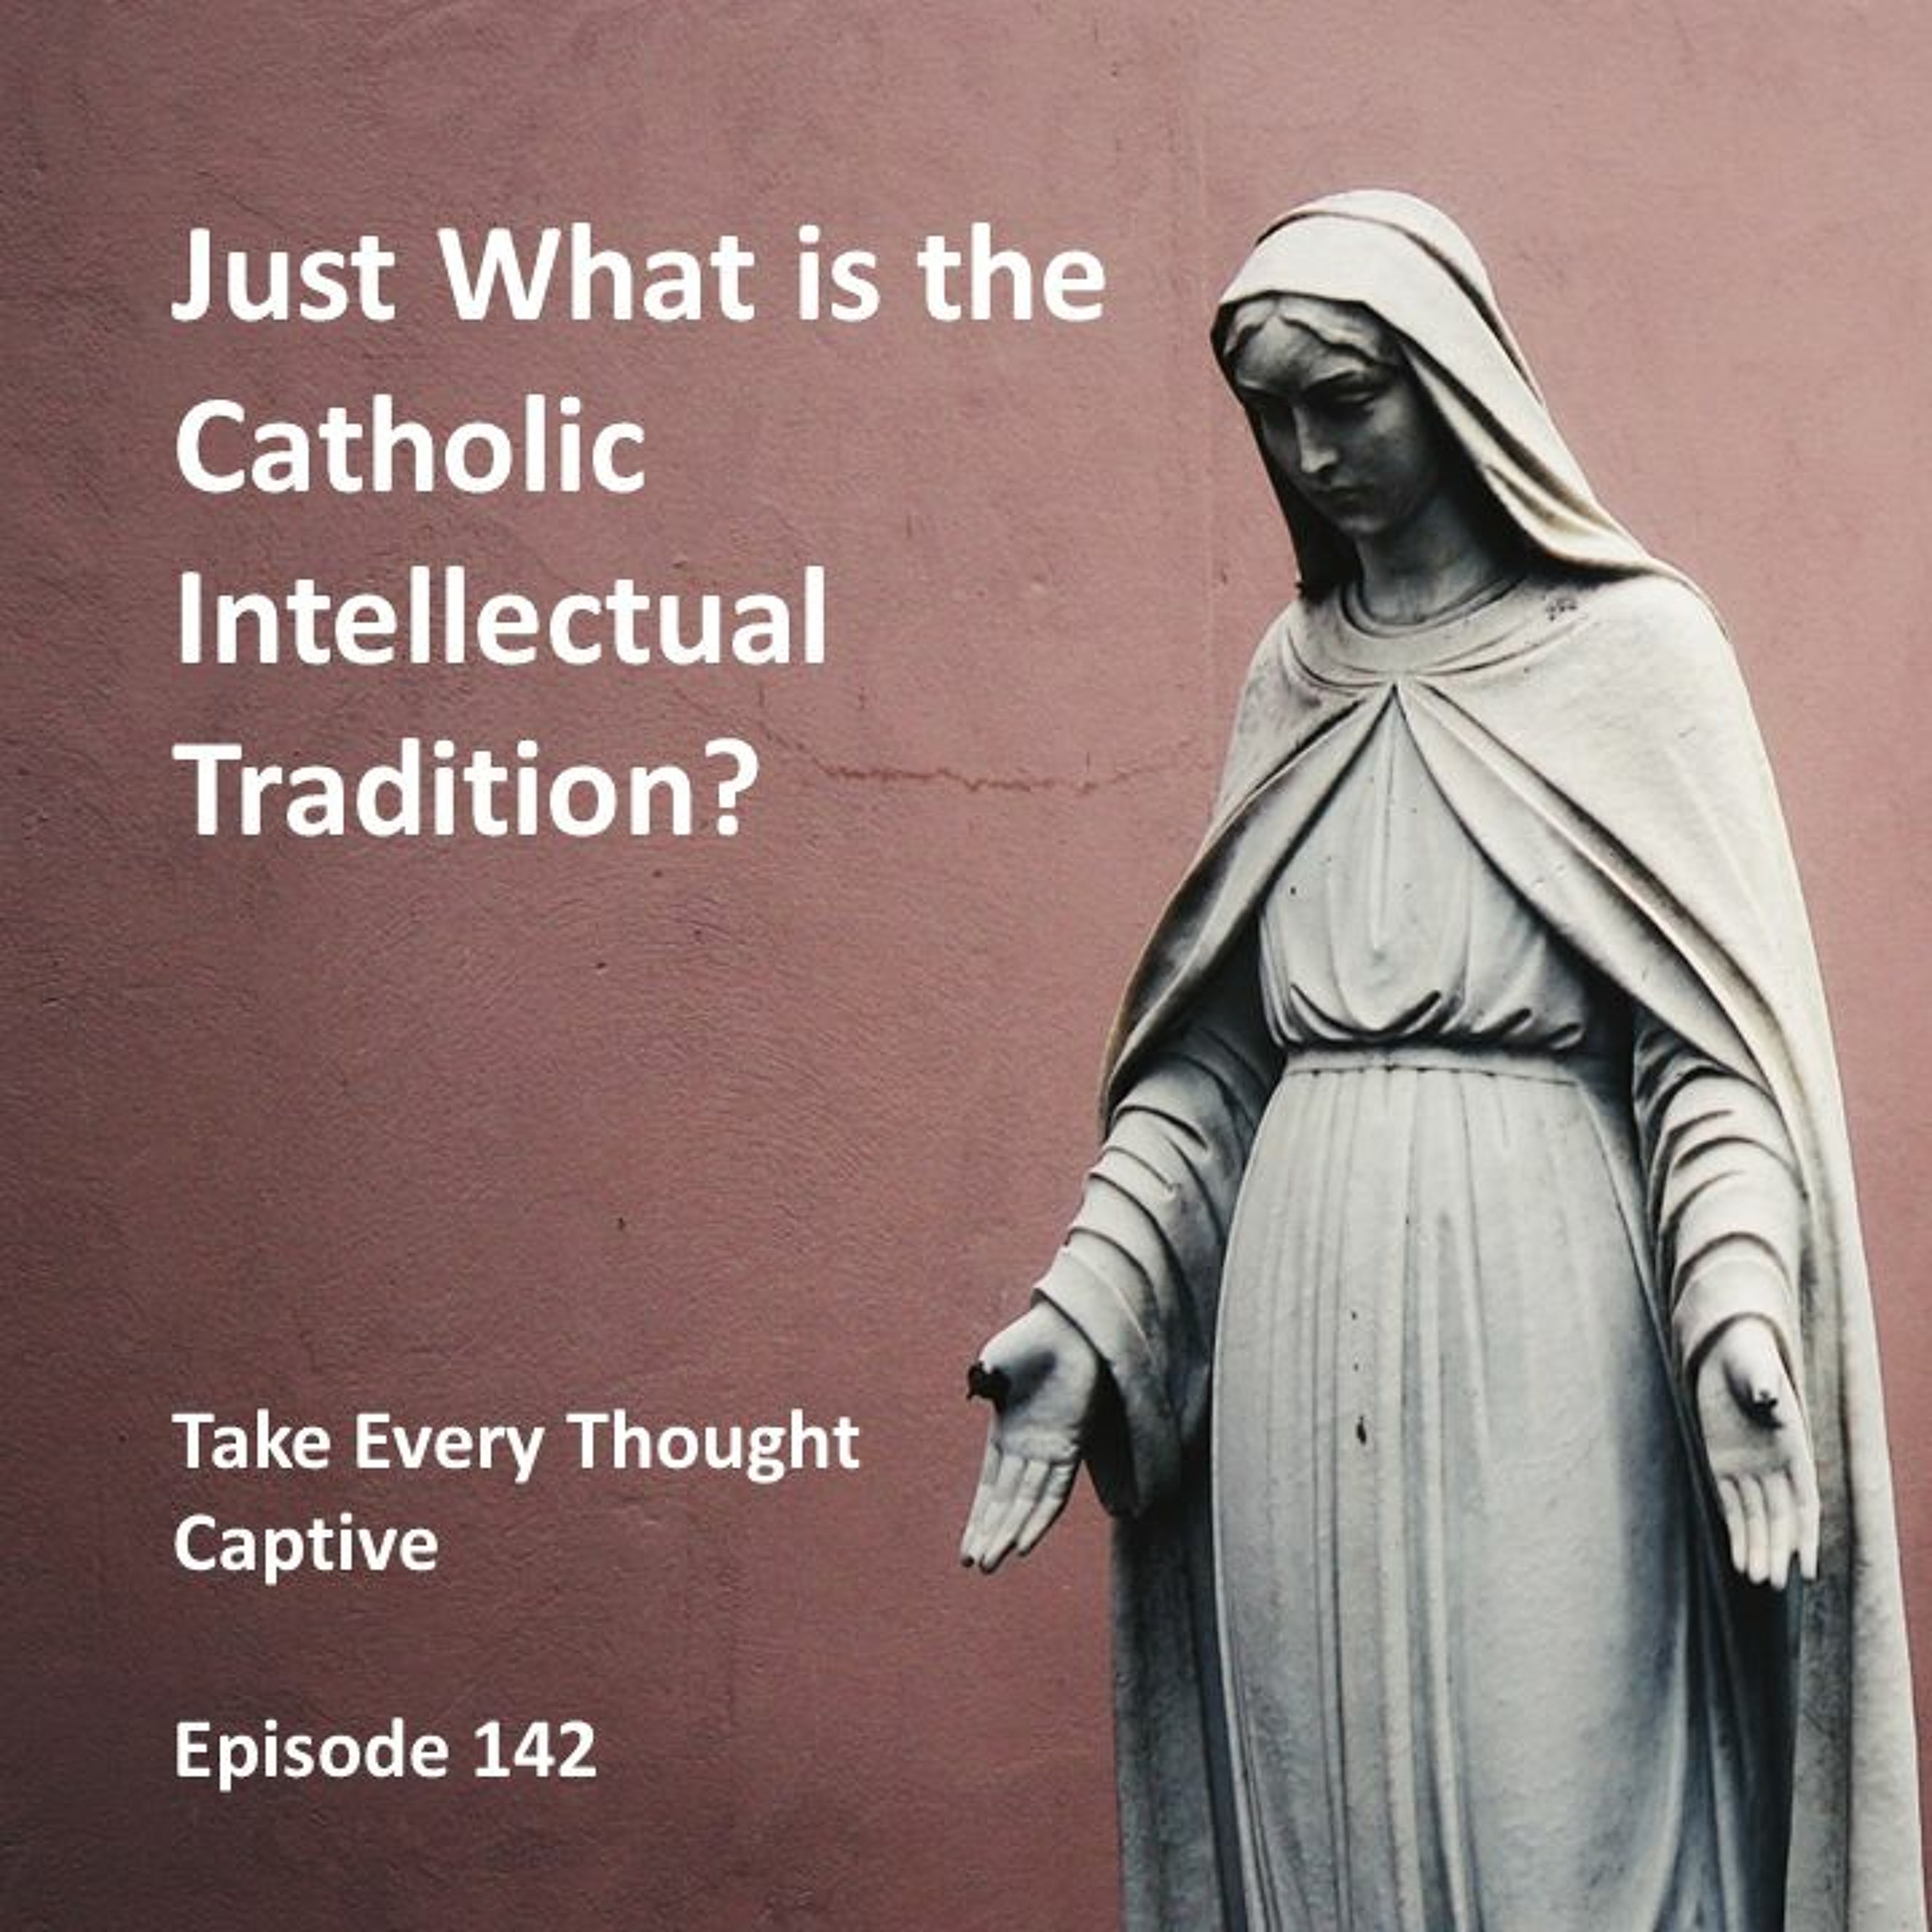 Just What is Catholic Intellectual Tradition?